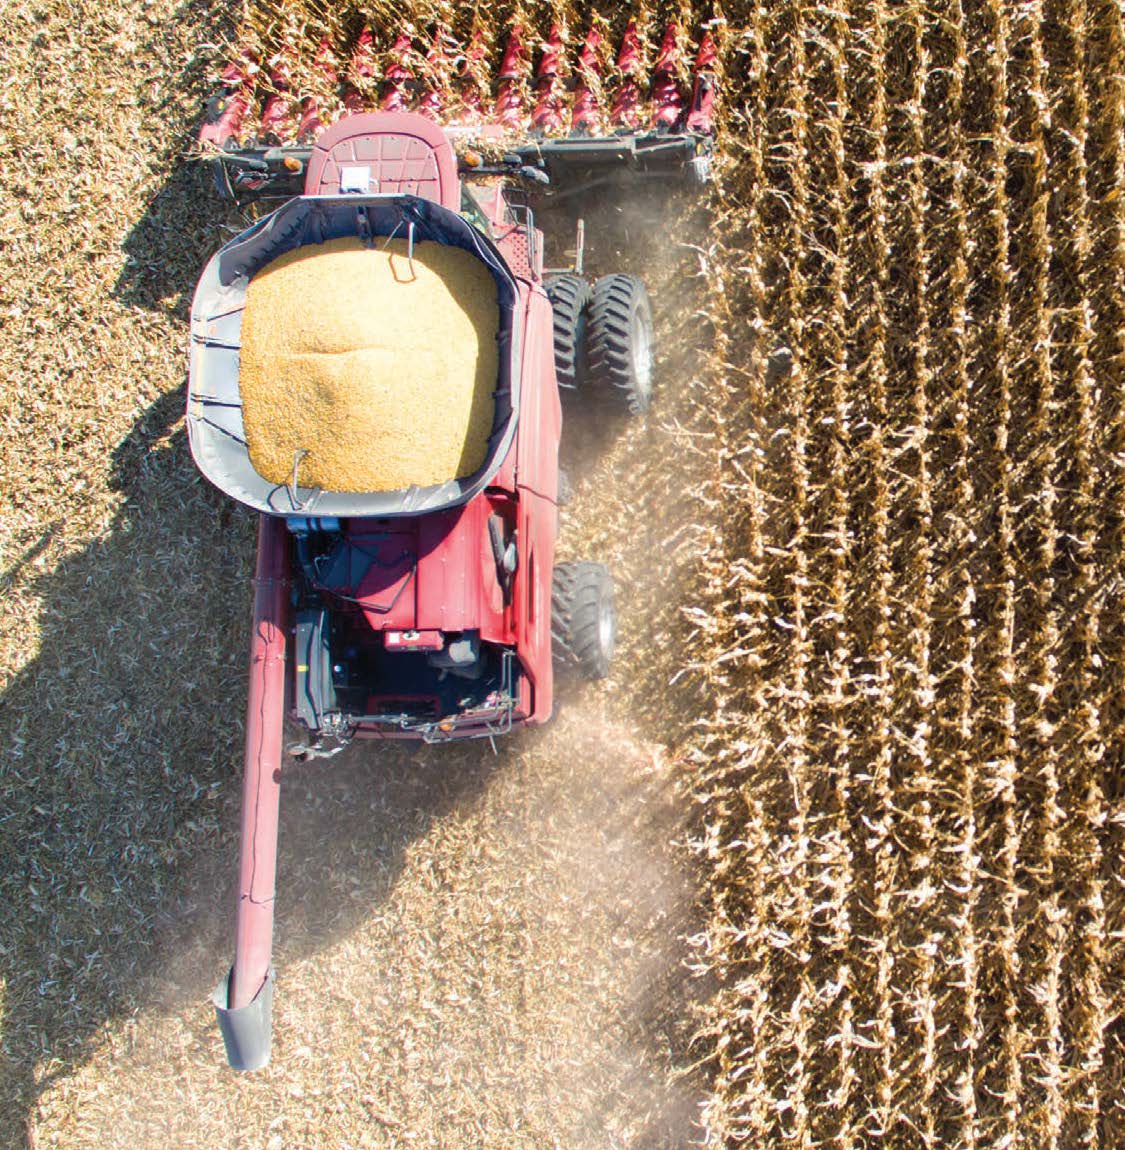 Tractor from above harvest crops